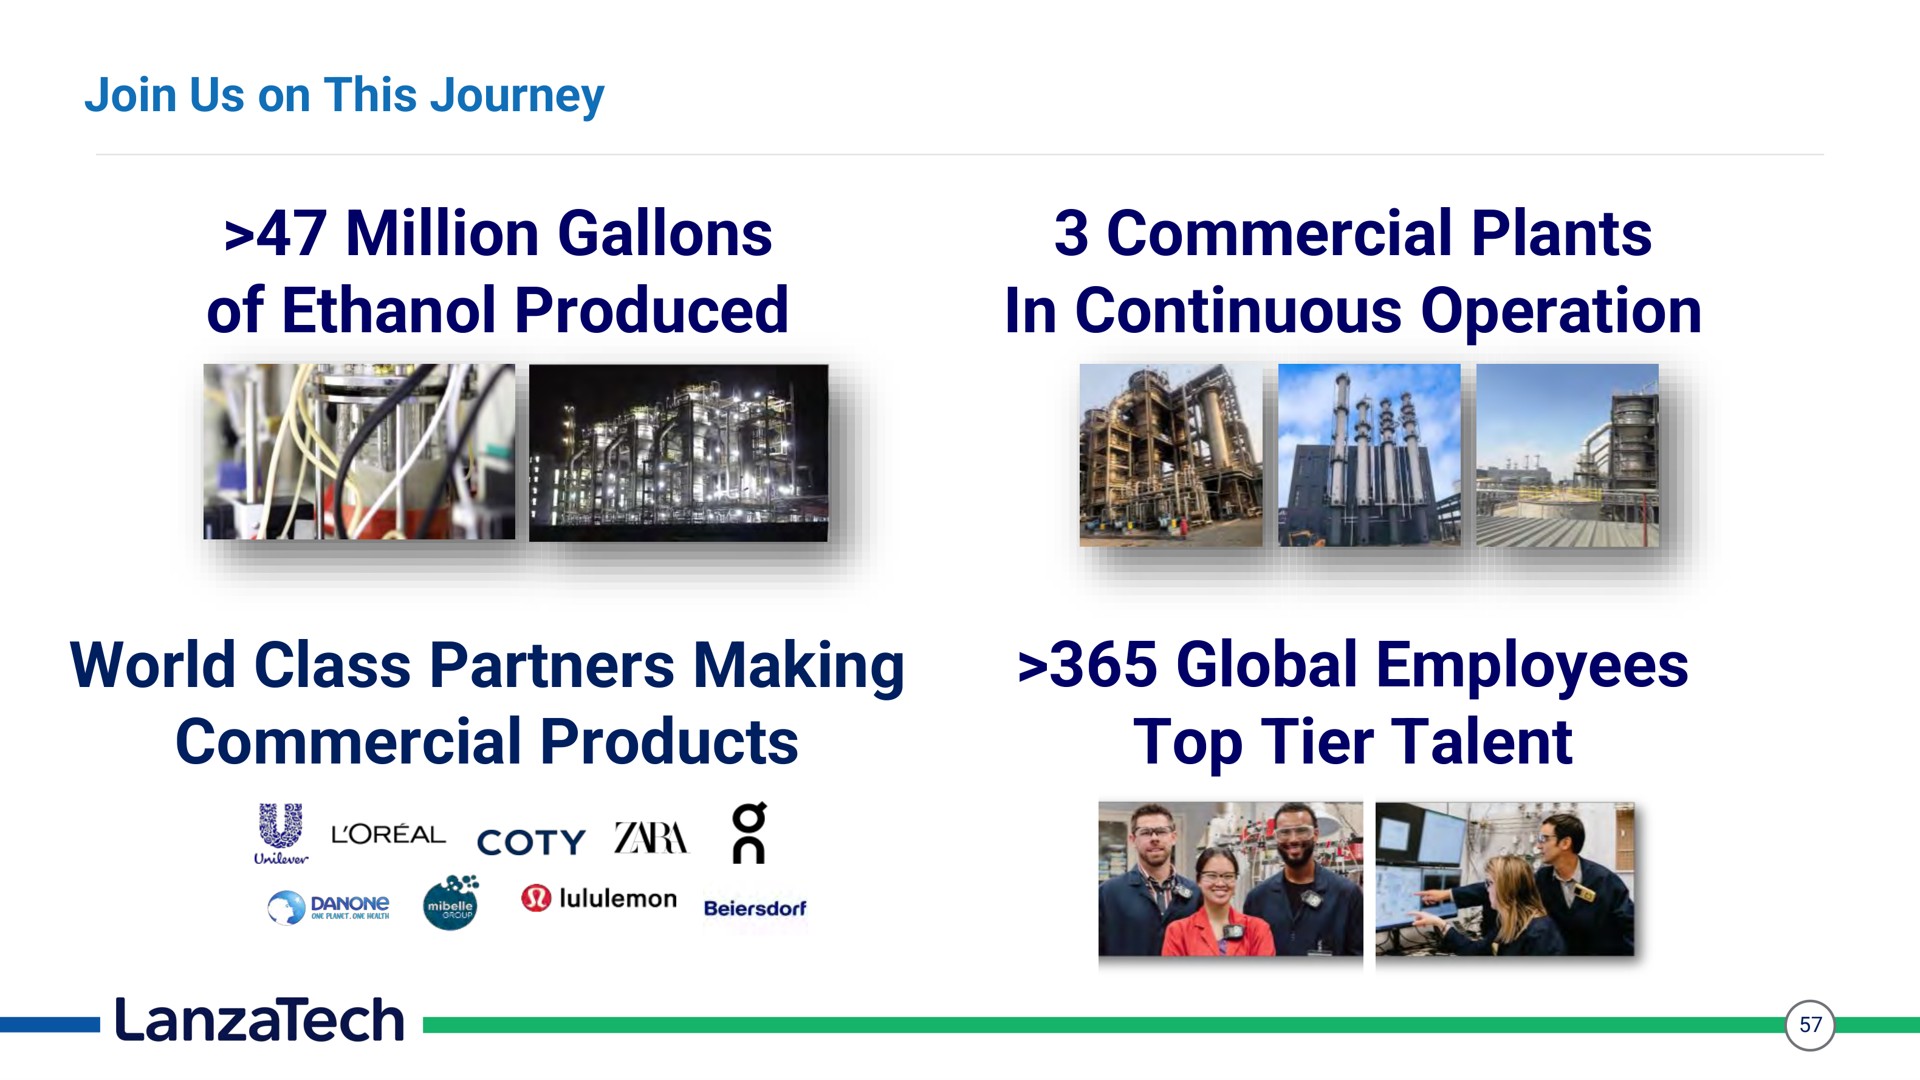 join us on this journey million gallons of ethanol produced commercial plants in continuous operation world class partners making commercial products global employees top tier talent cone | LanzaTech